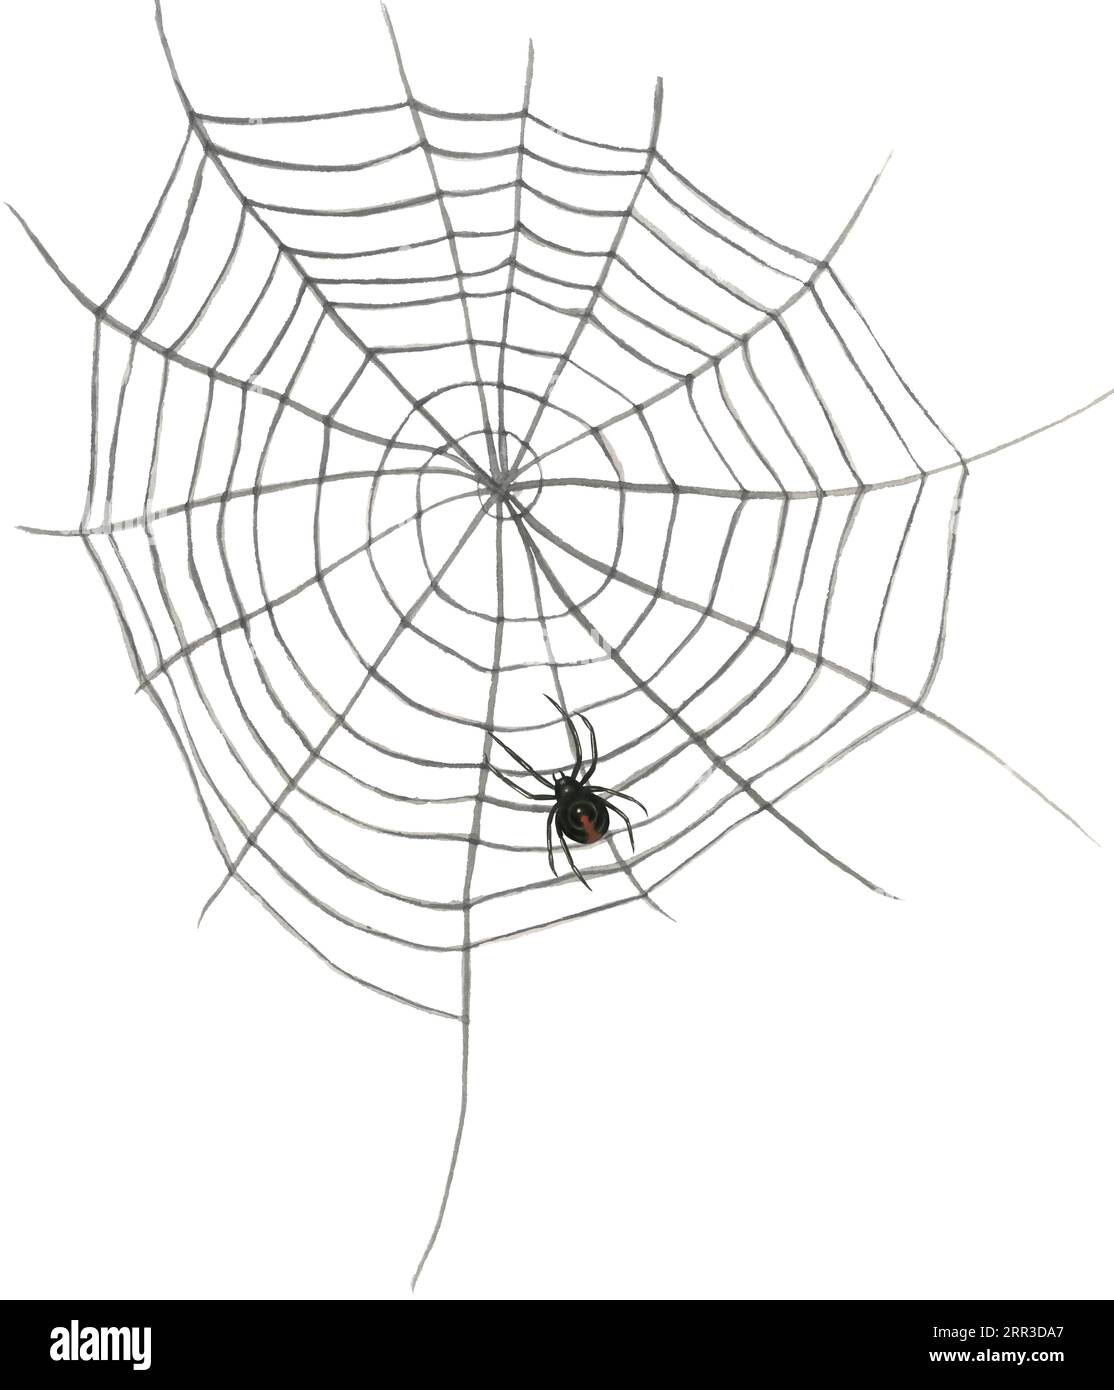 Watercolor illustration of a web with a black widow spider. Isolated on white background hand drawn Stock Photo